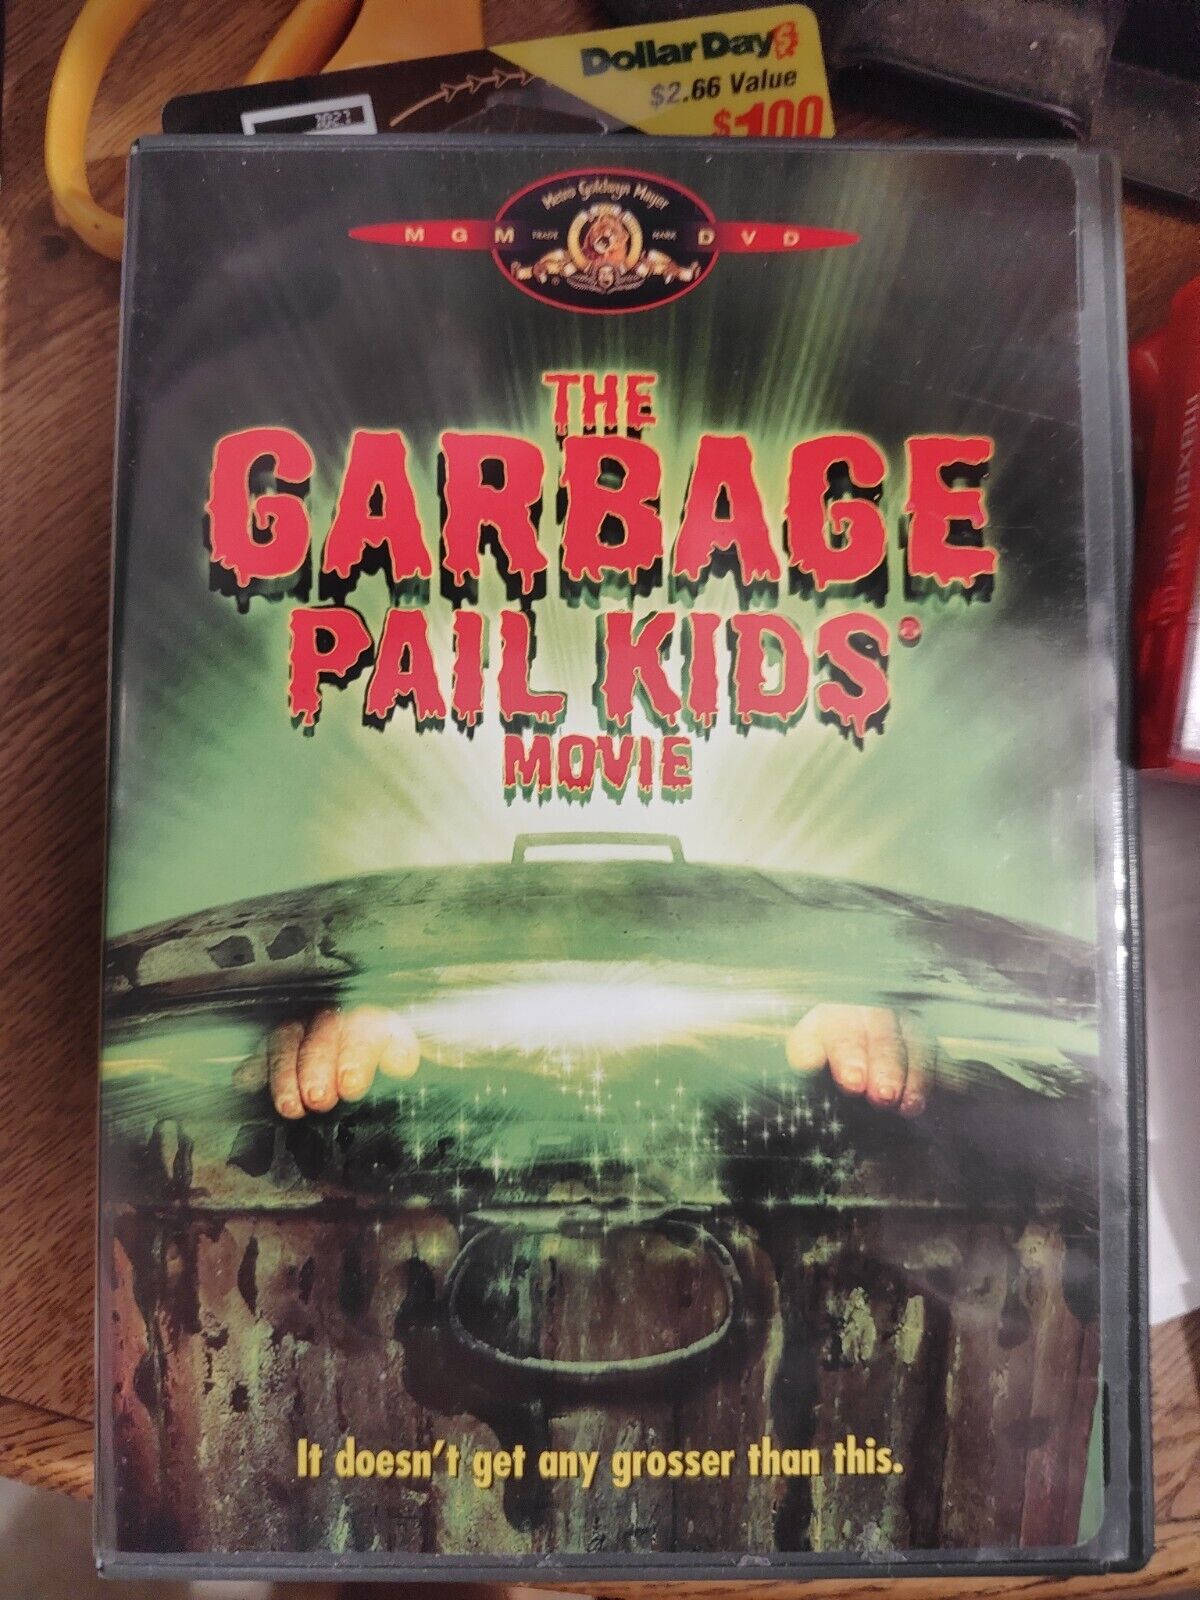 Classic Vintage DVD - The Garbage Pail Kids Movie - Cult Classic Film